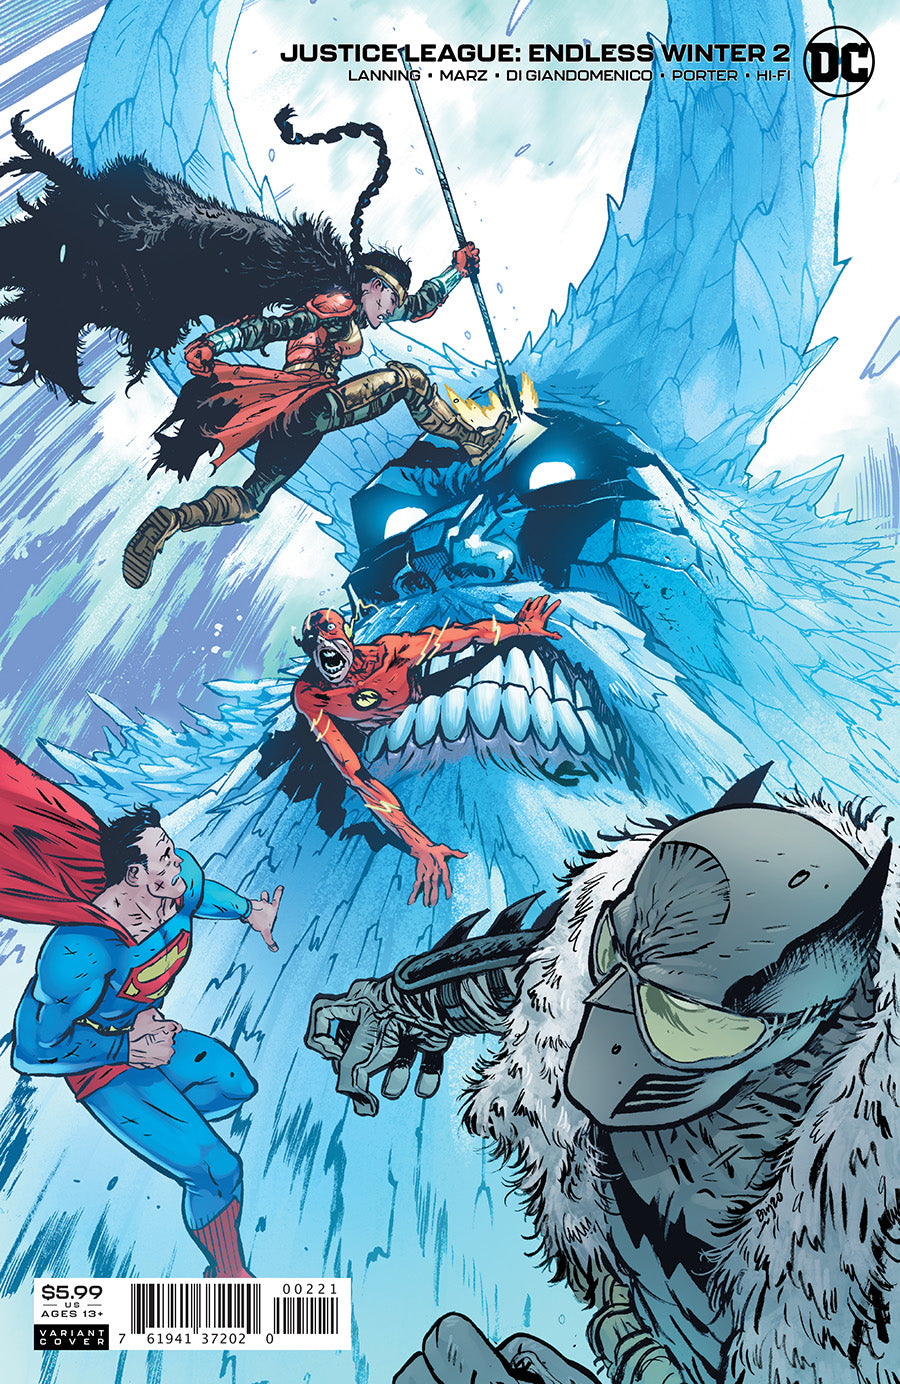 Justice League Endless Winter 2 - Heroes Cave